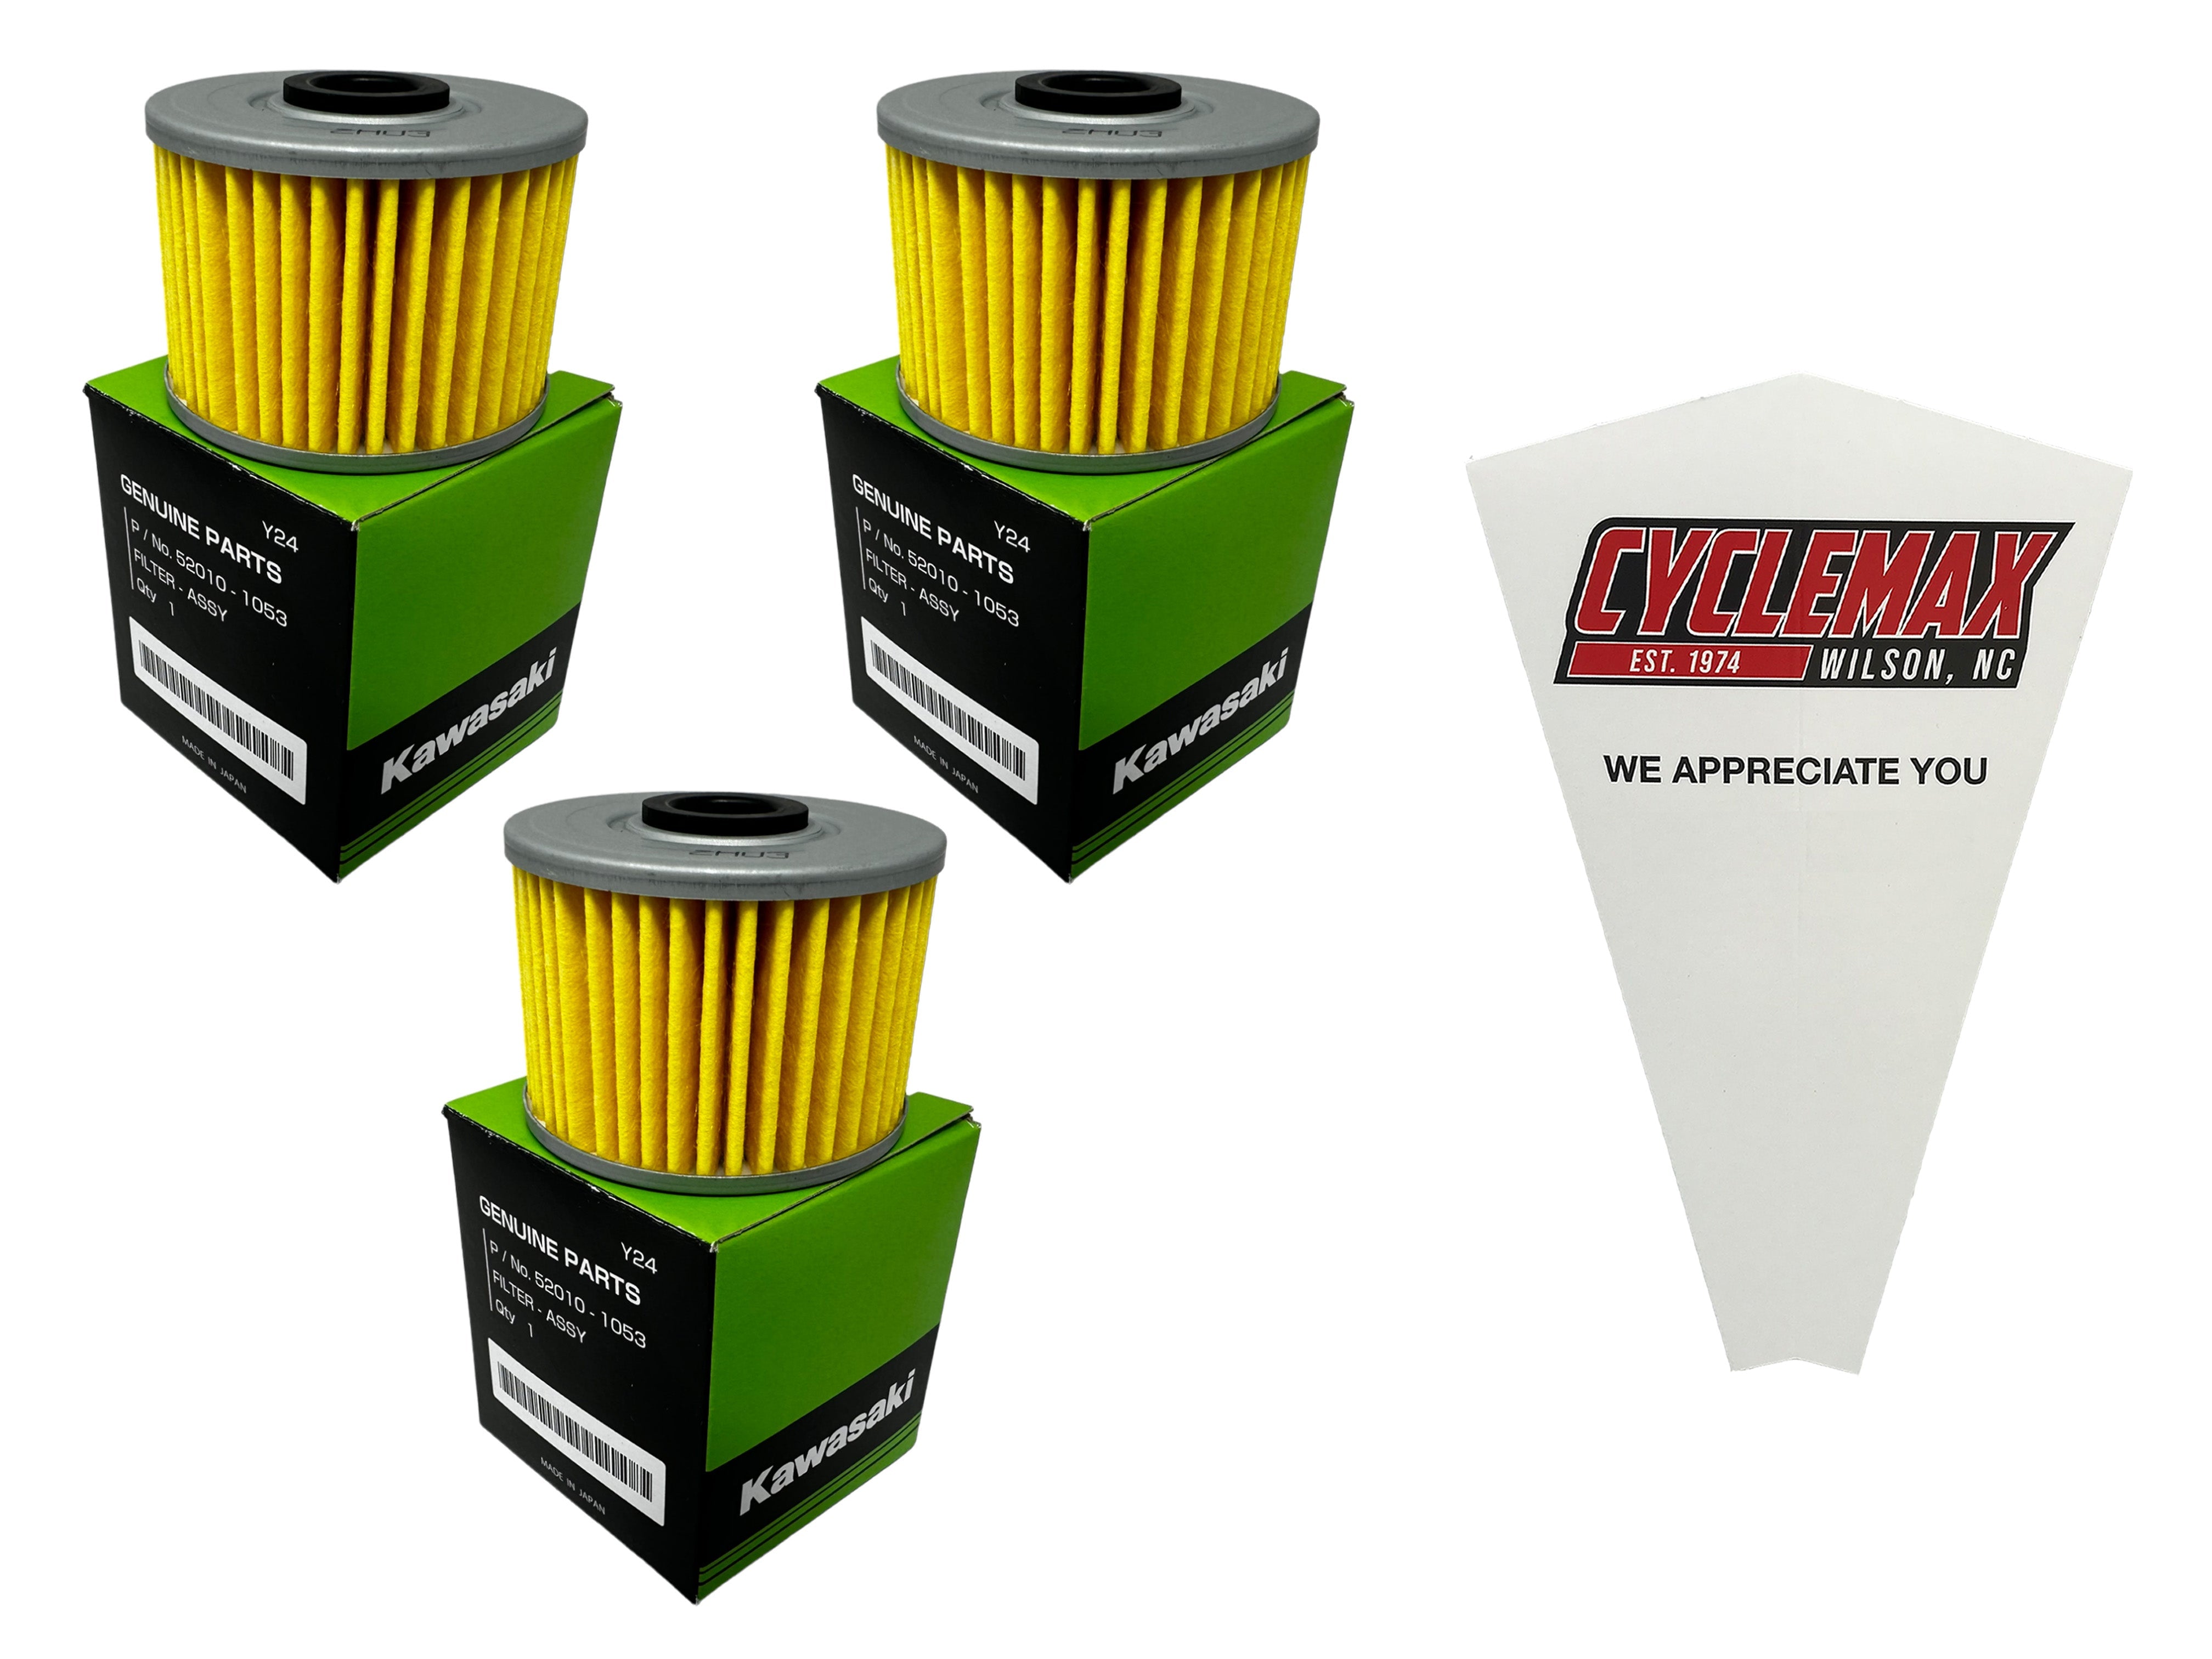 Cyclemax Three Pack for Kawasaki Oil Filter 52010-1053 Contains Three Filters and a Funnel